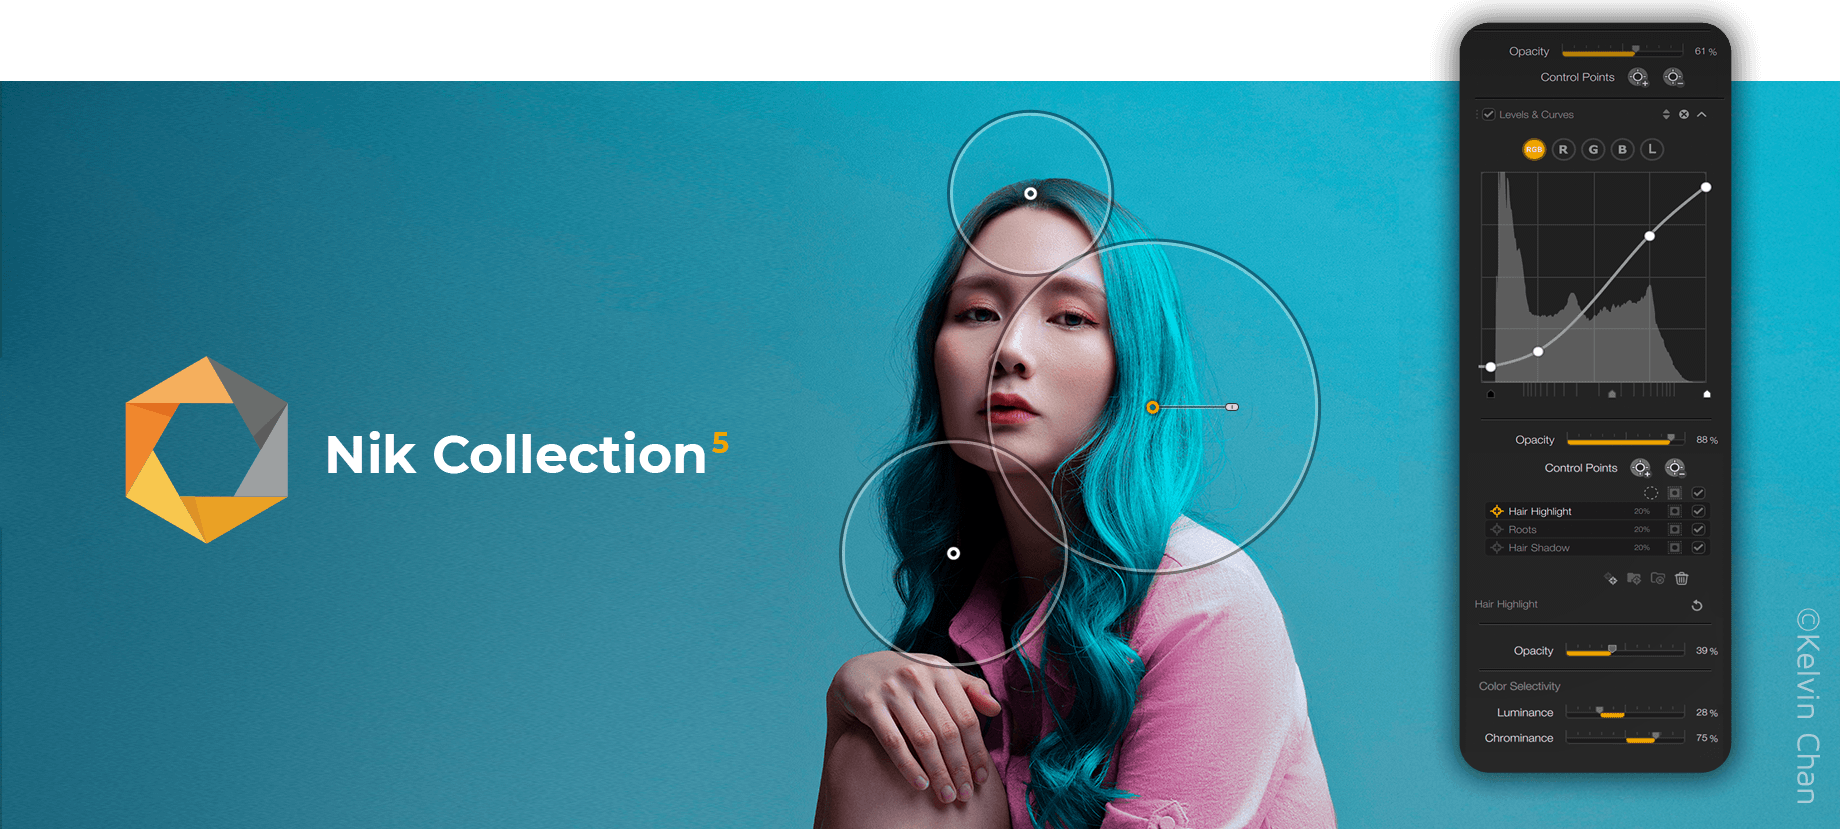 Nik Collection by DxO 6.4.0 download the new for windows